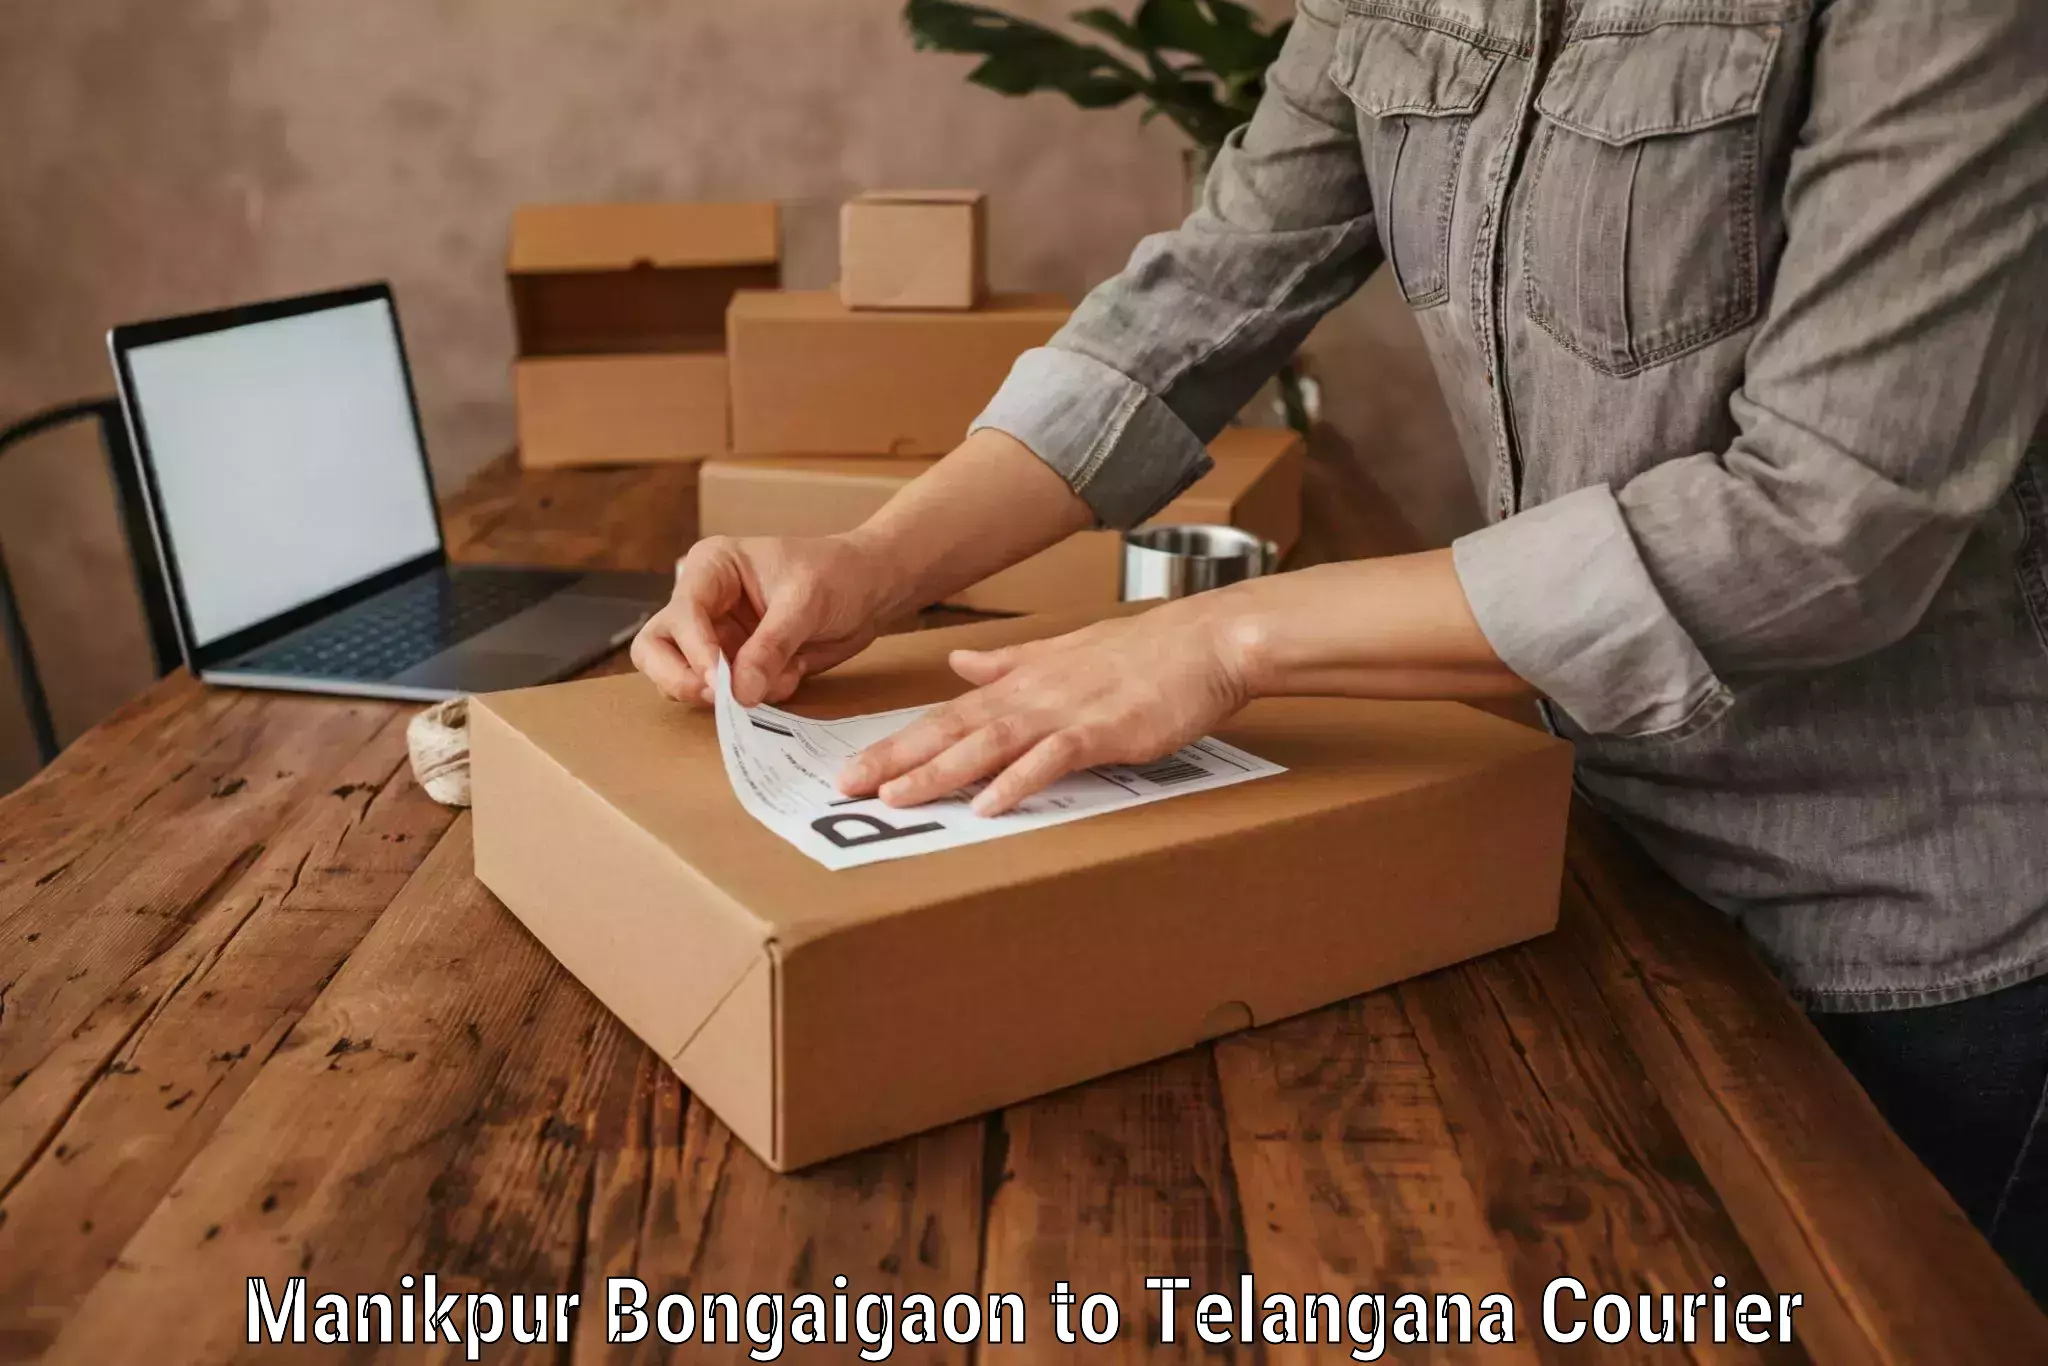 Luggage delivery logistics in Manikpur Bongaigaon to Hyderabad